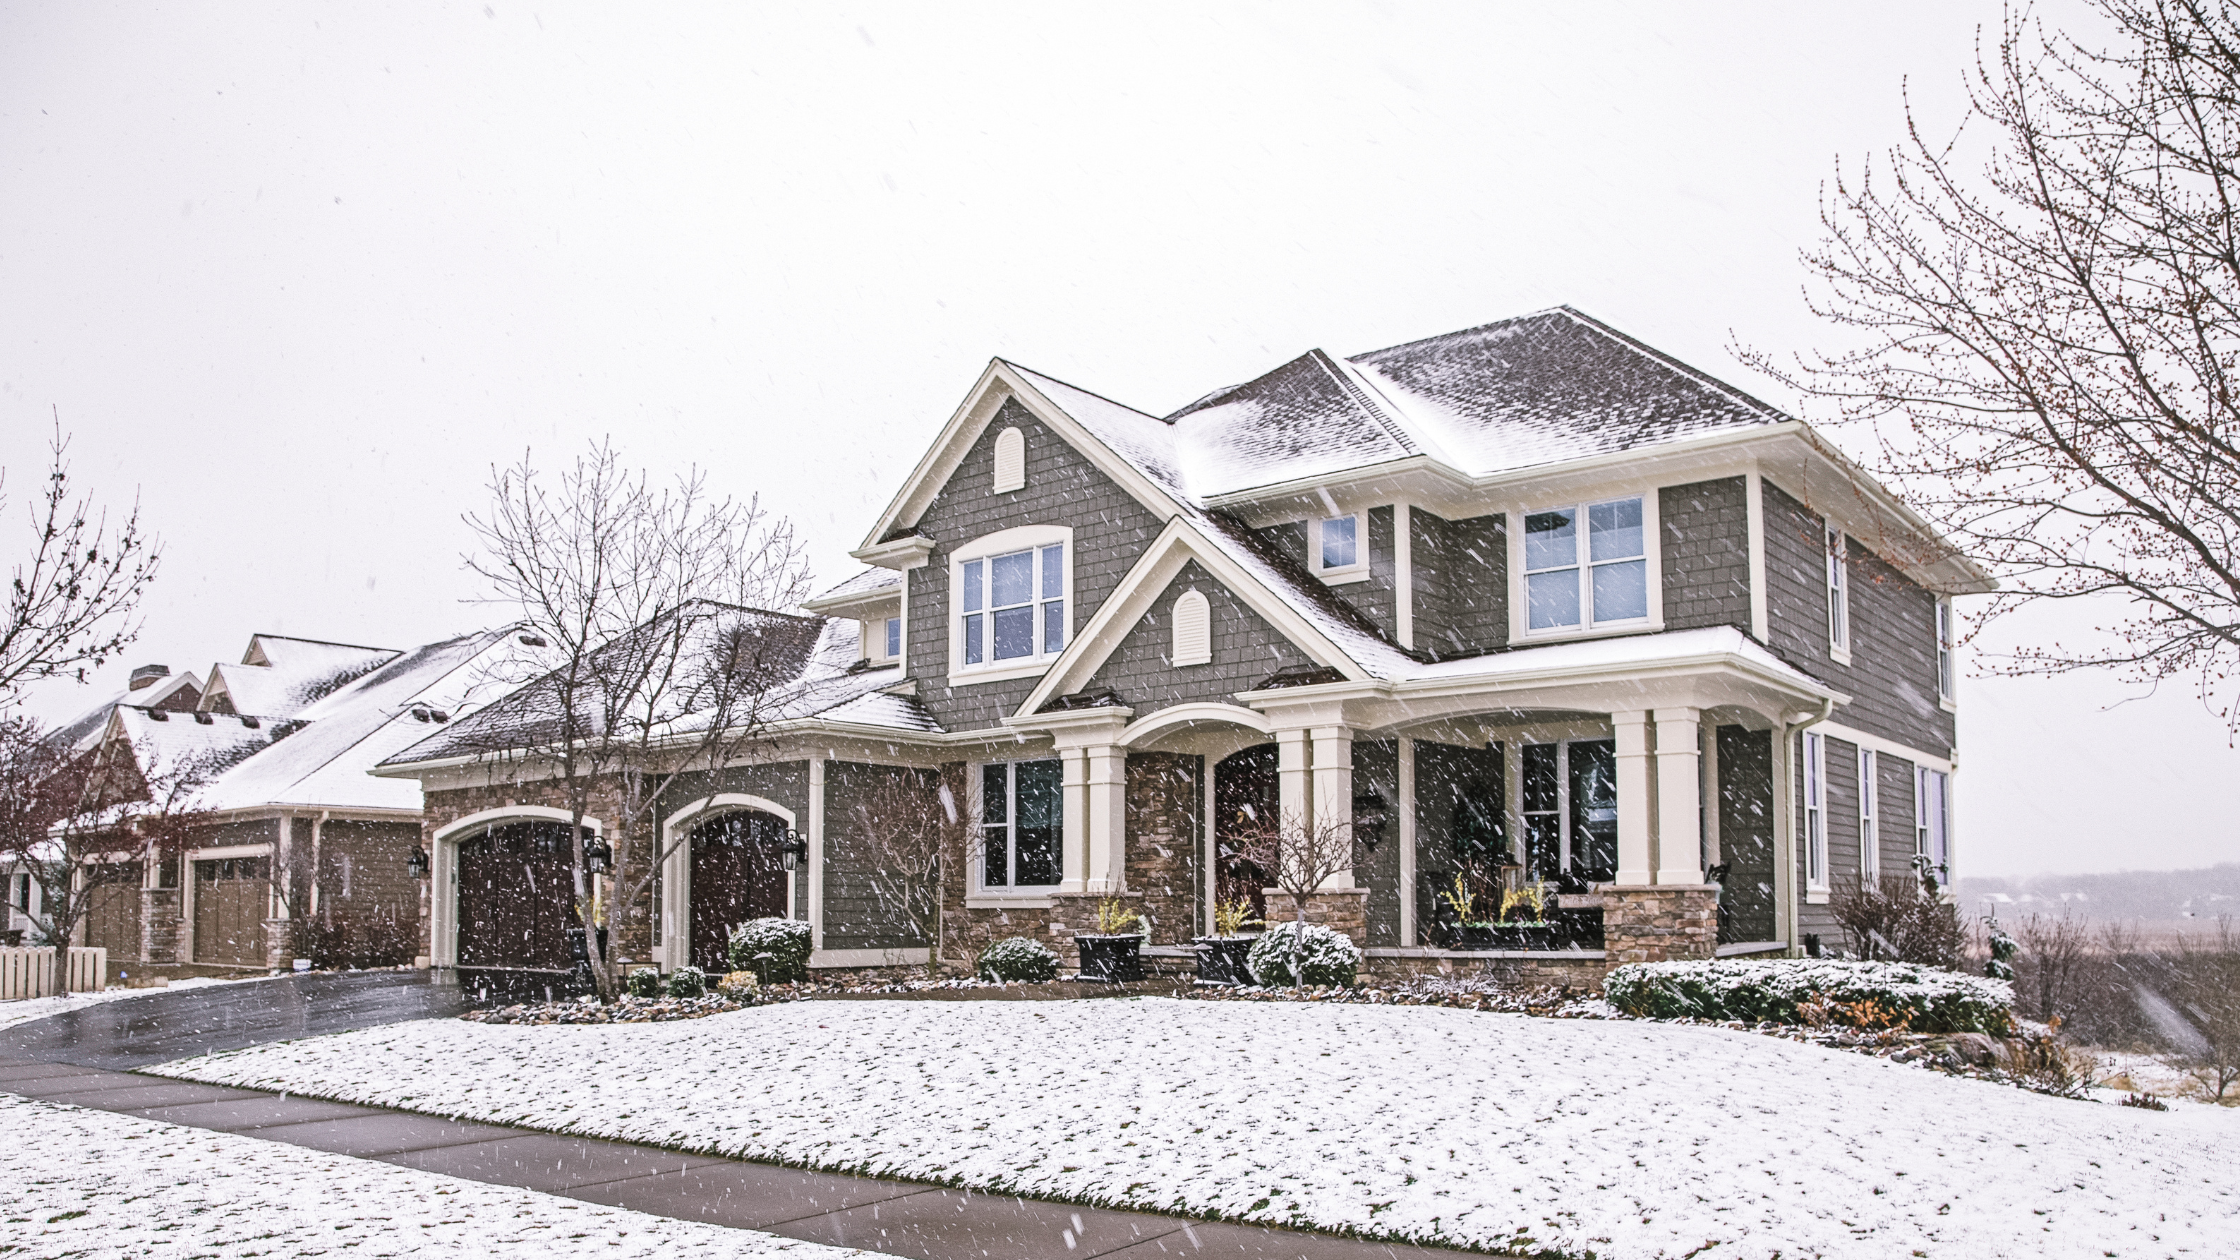 Snow covered front yard with two story home